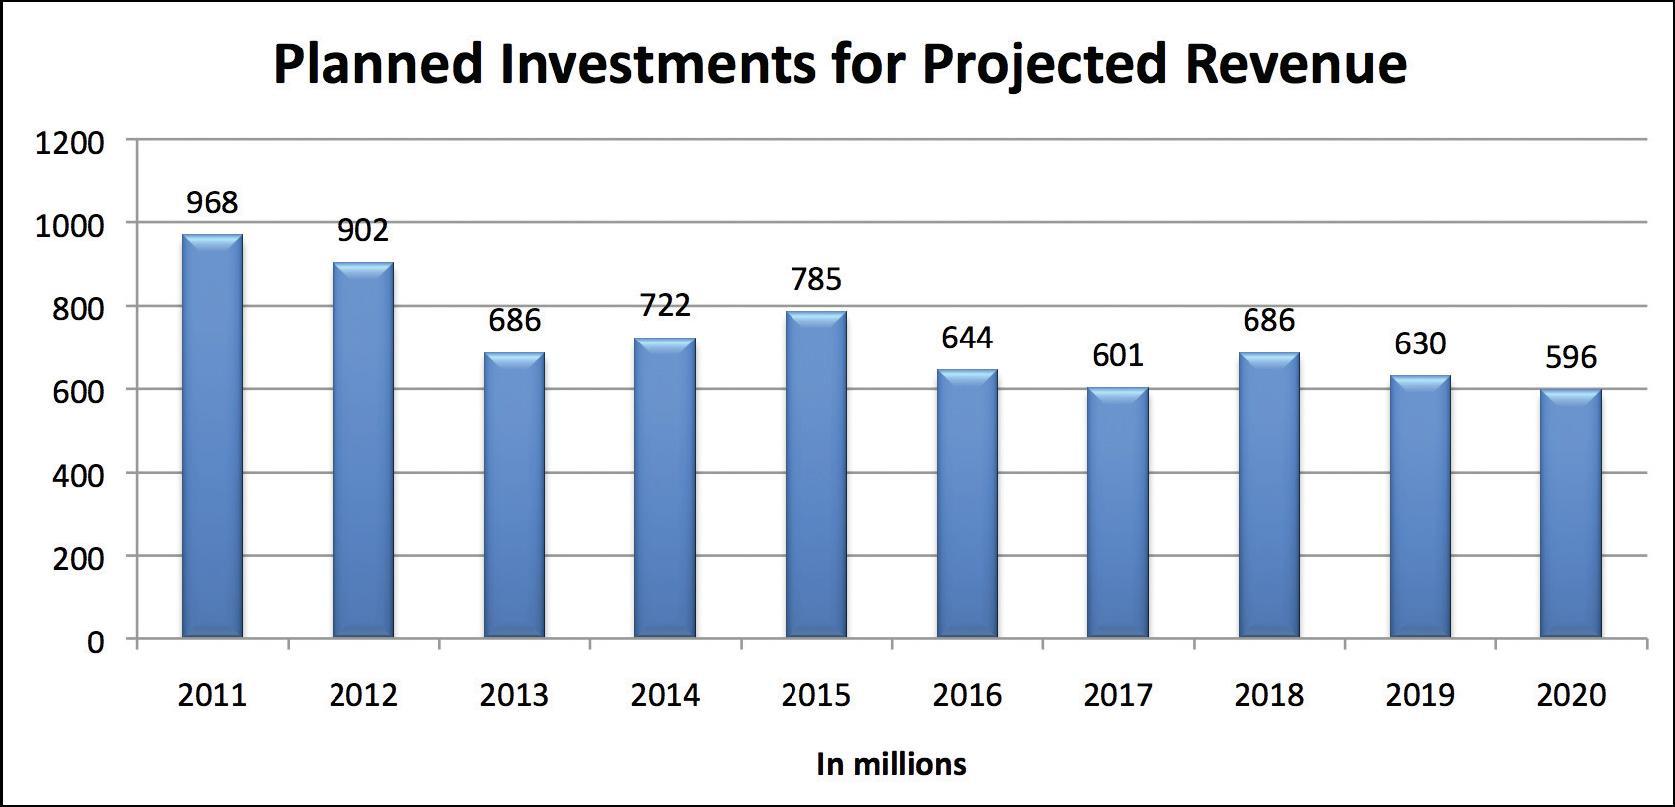 Figure 32 illustrates the planned investments overall for the Minnesota DOT from 2011 to 2020. The vertical bars illustrate a steady decline in expenditure level with expenditures at 968 million in 2011 declining to 686 million in 2013, rising in 2014 to 722 million and then to 785 million in in 2015 and gradually declining to 596 million in 2020. 